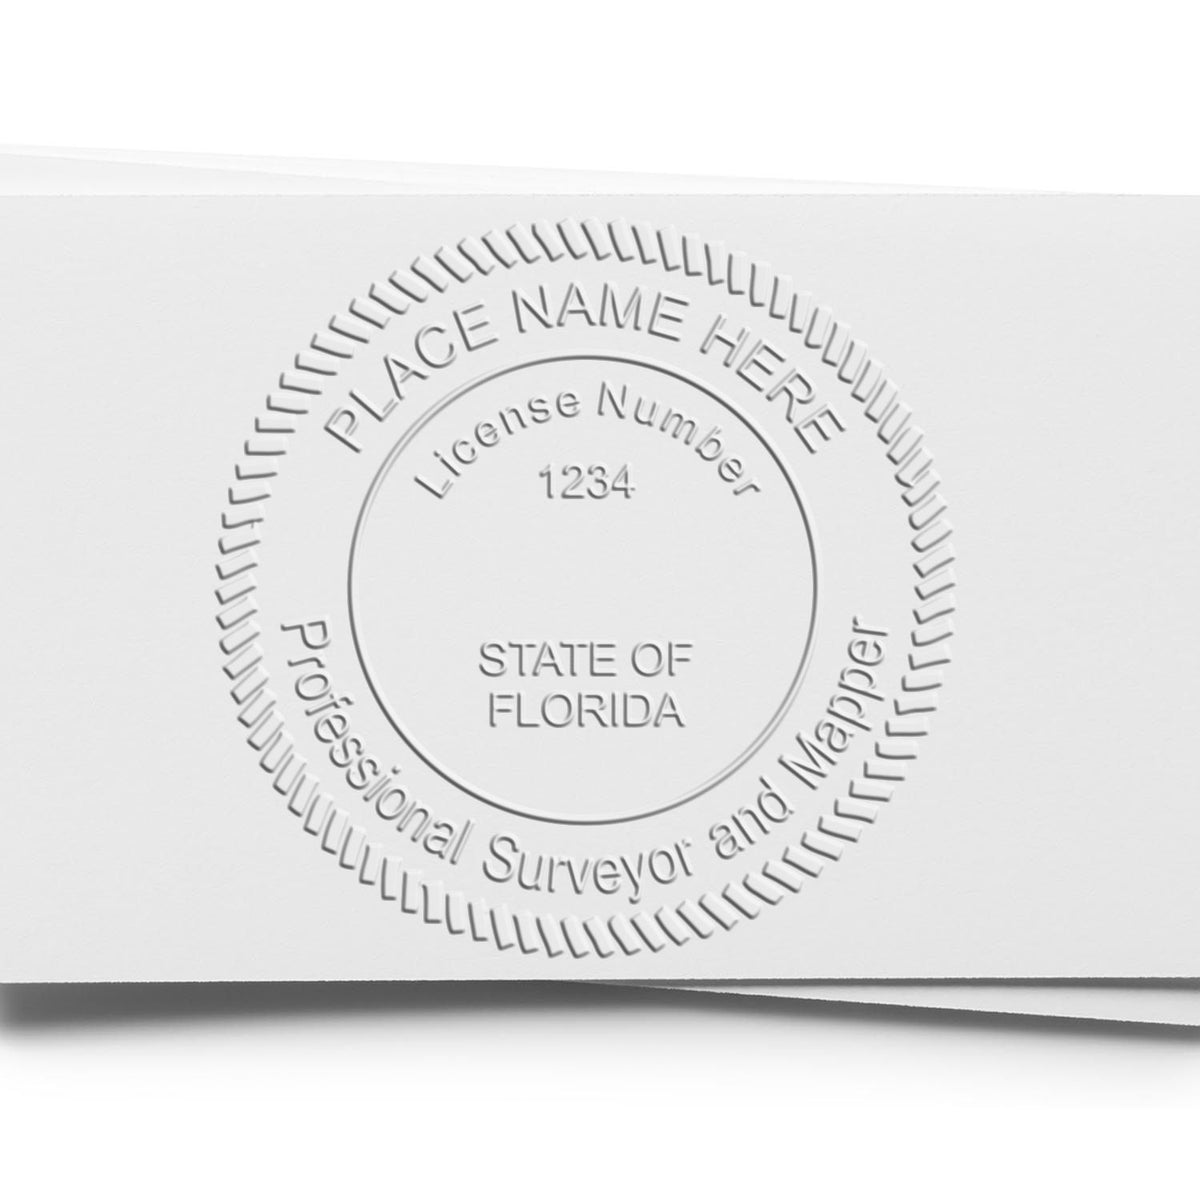 The Long Reach Florida Land Surveyor Seal stamp impression comes to life with a crisp, detailed photo on paper - showcasing true professional quality.